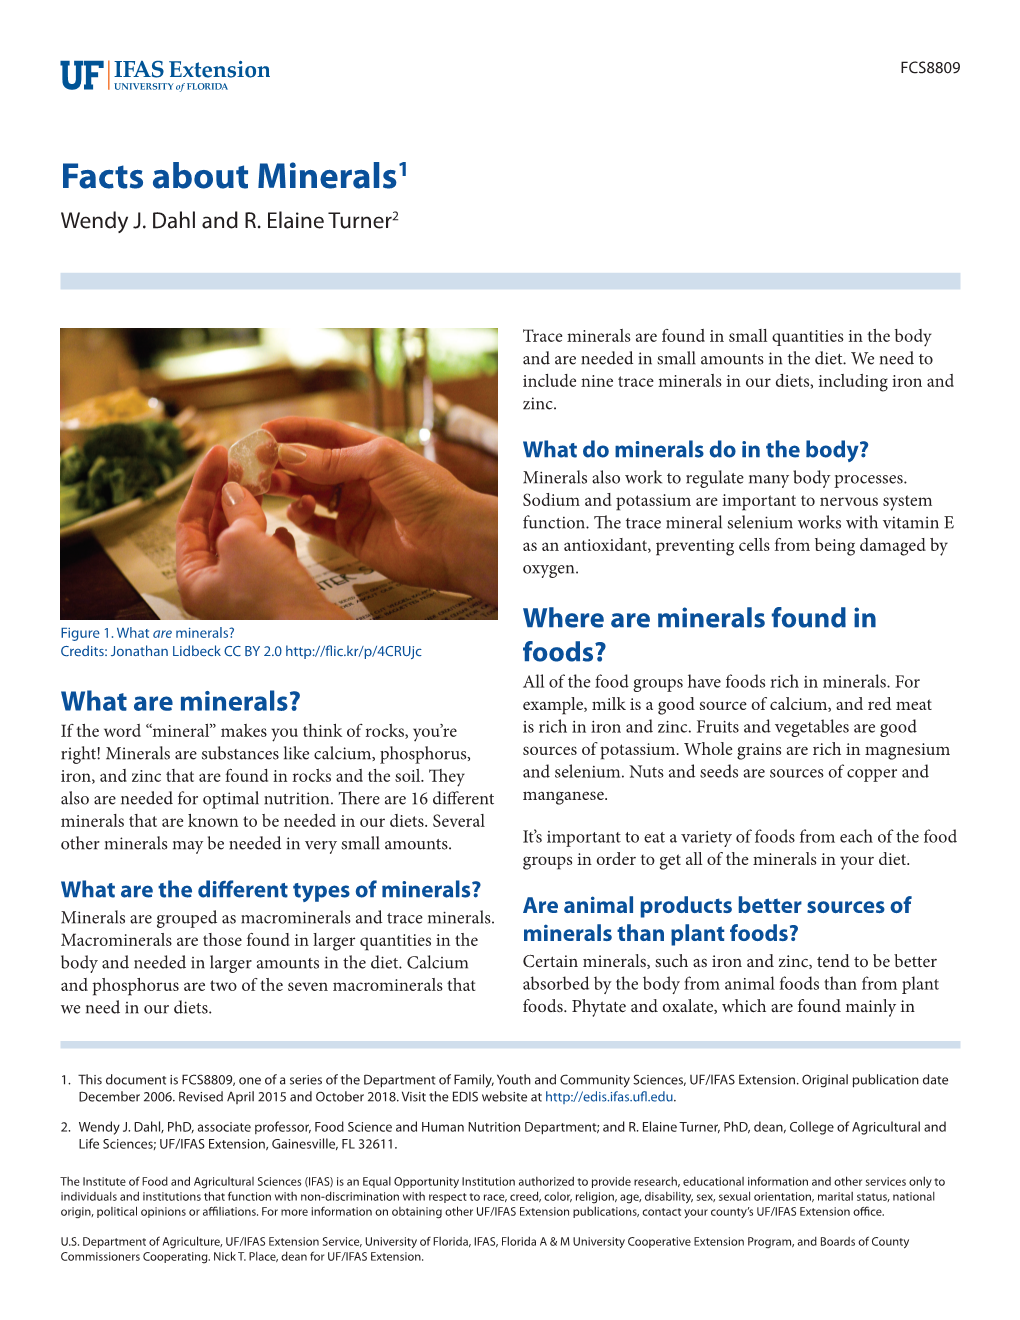 Facts About Minerals1 Wendy J